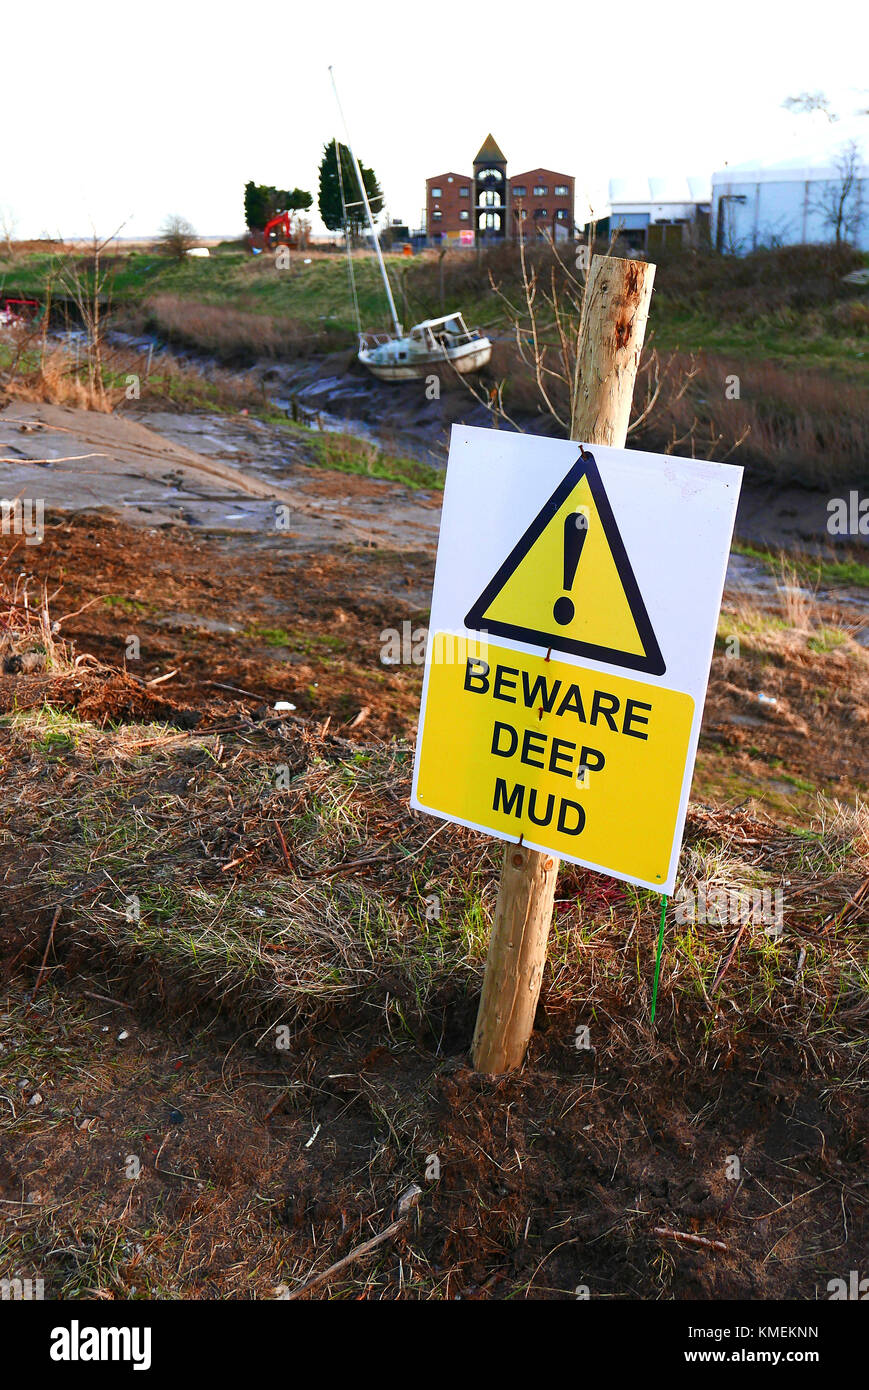 Beware deep mud sign on banks of small creek with grounded boat in background Stock Photo